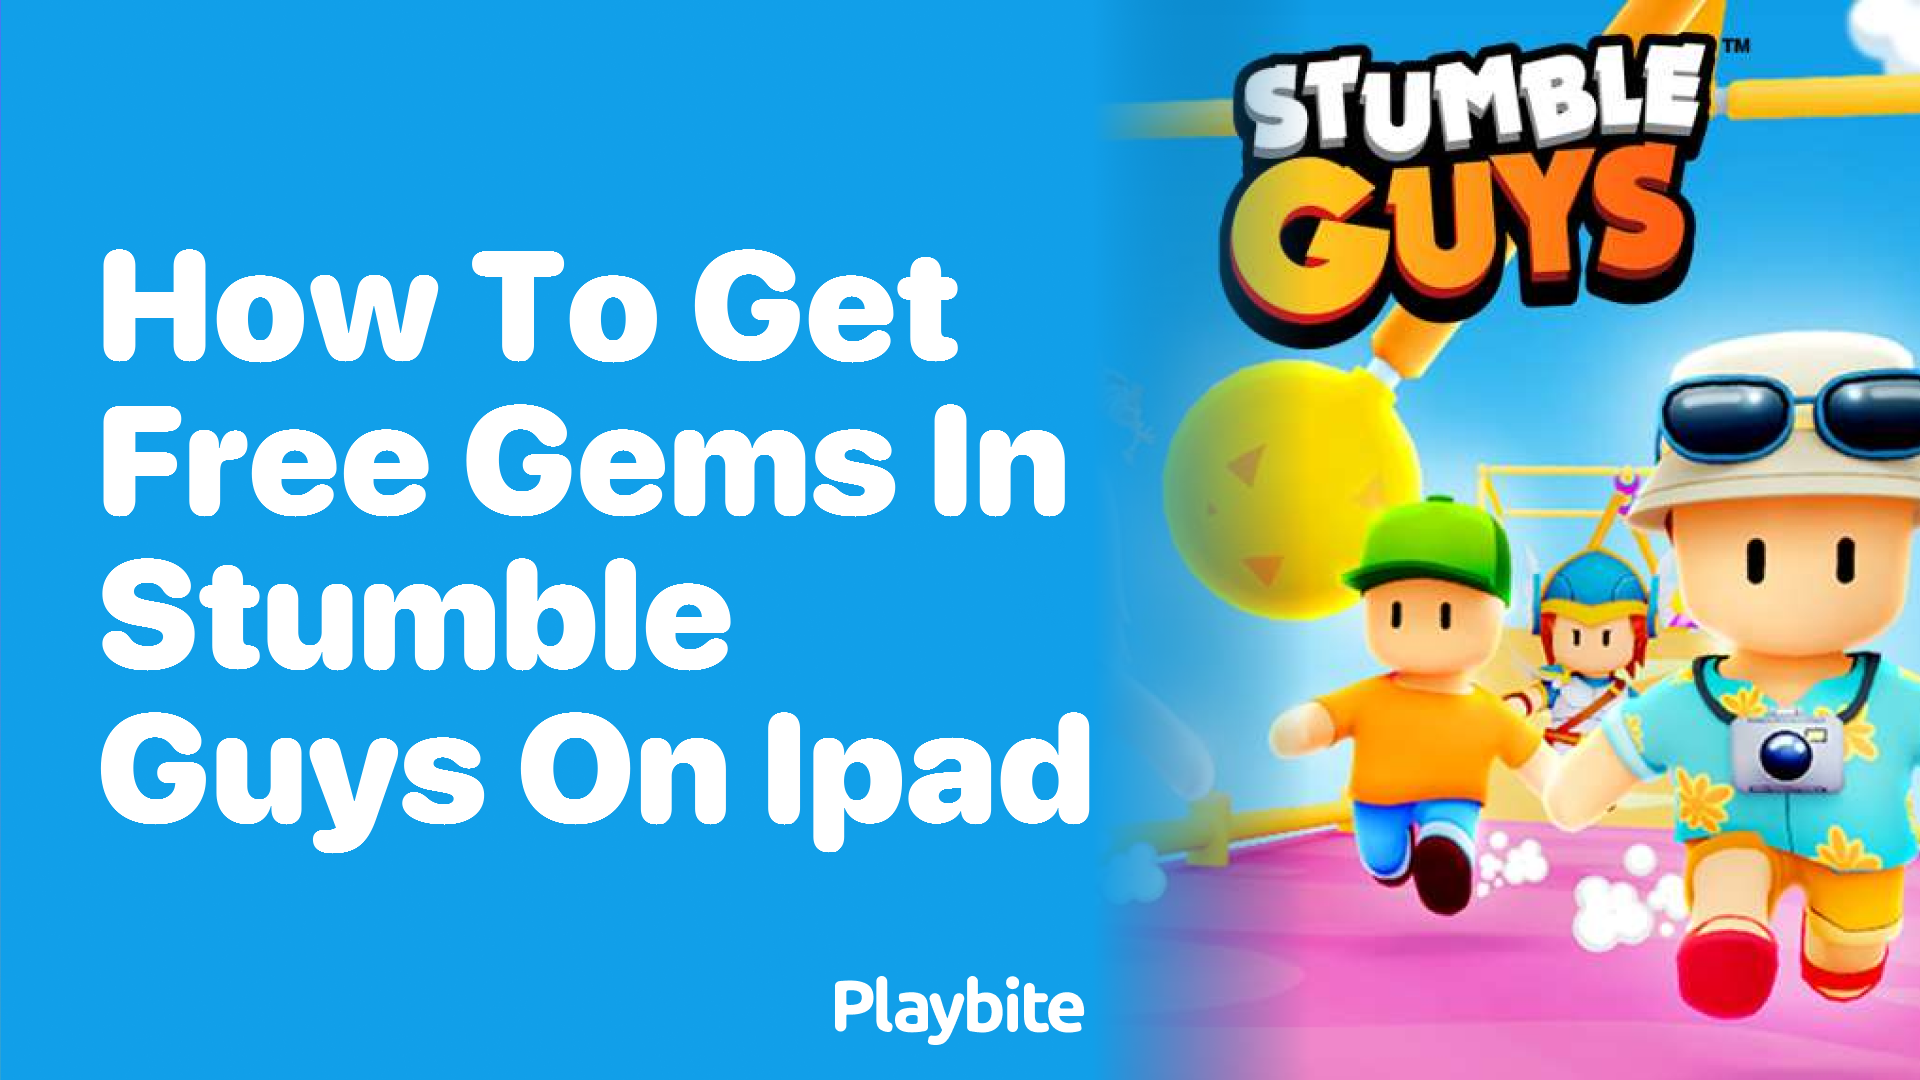 How to Get Free Gems in Stumble Guys on iPad